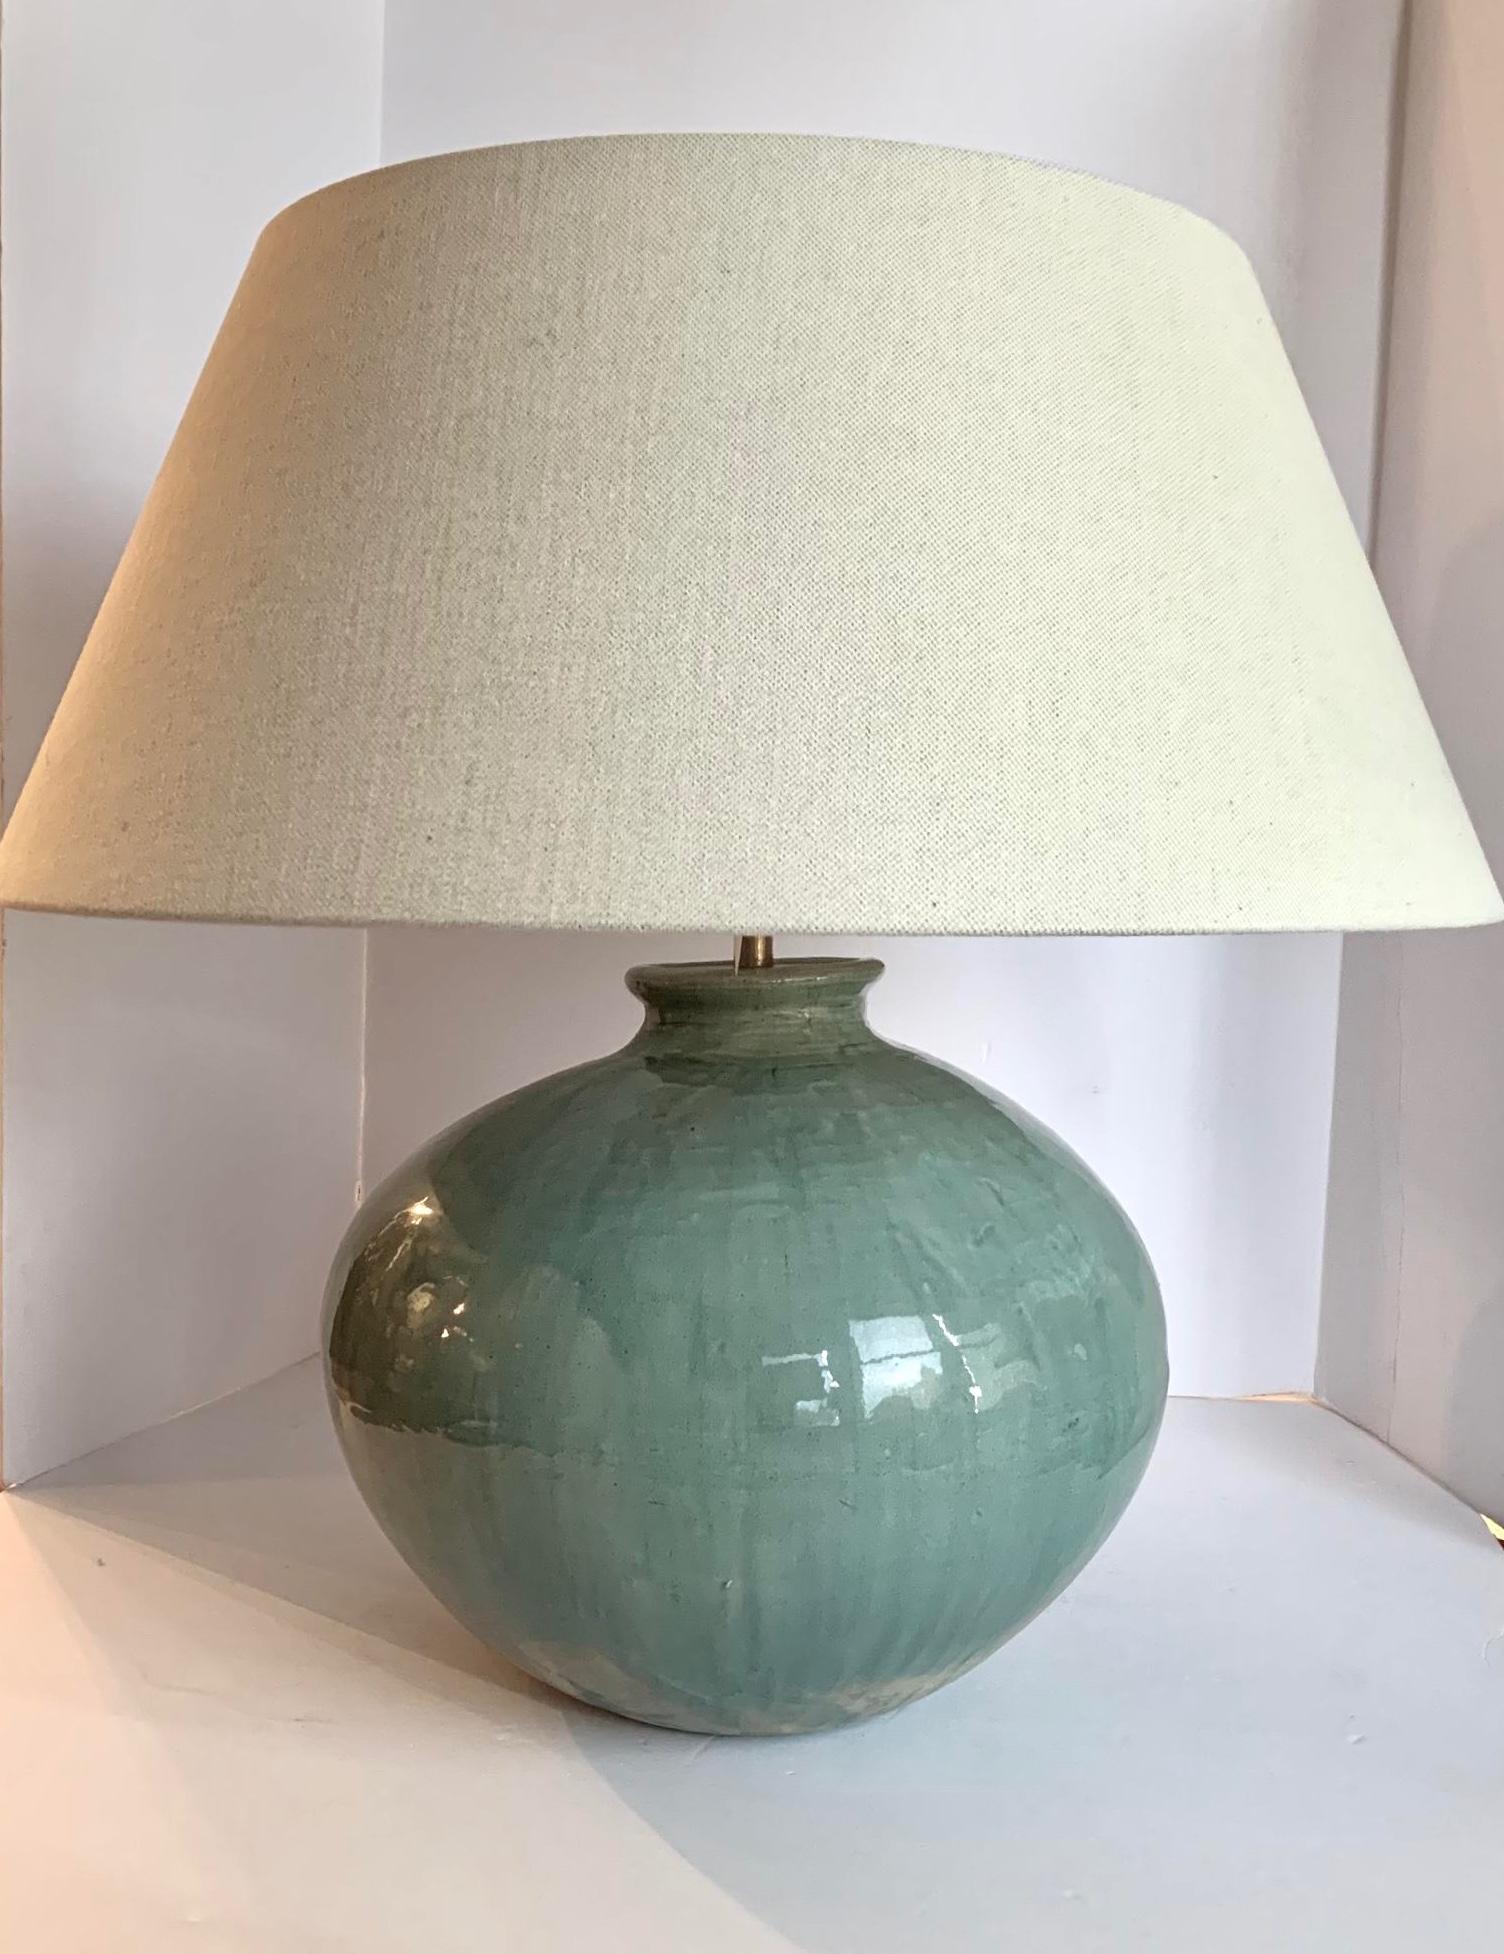 Contemporary Chinese pair of washed turquoise lamps.
The turquoise glaze has the appearance of being washed. This gives the finish slightly varied degrees of the turquoise color.
Round 